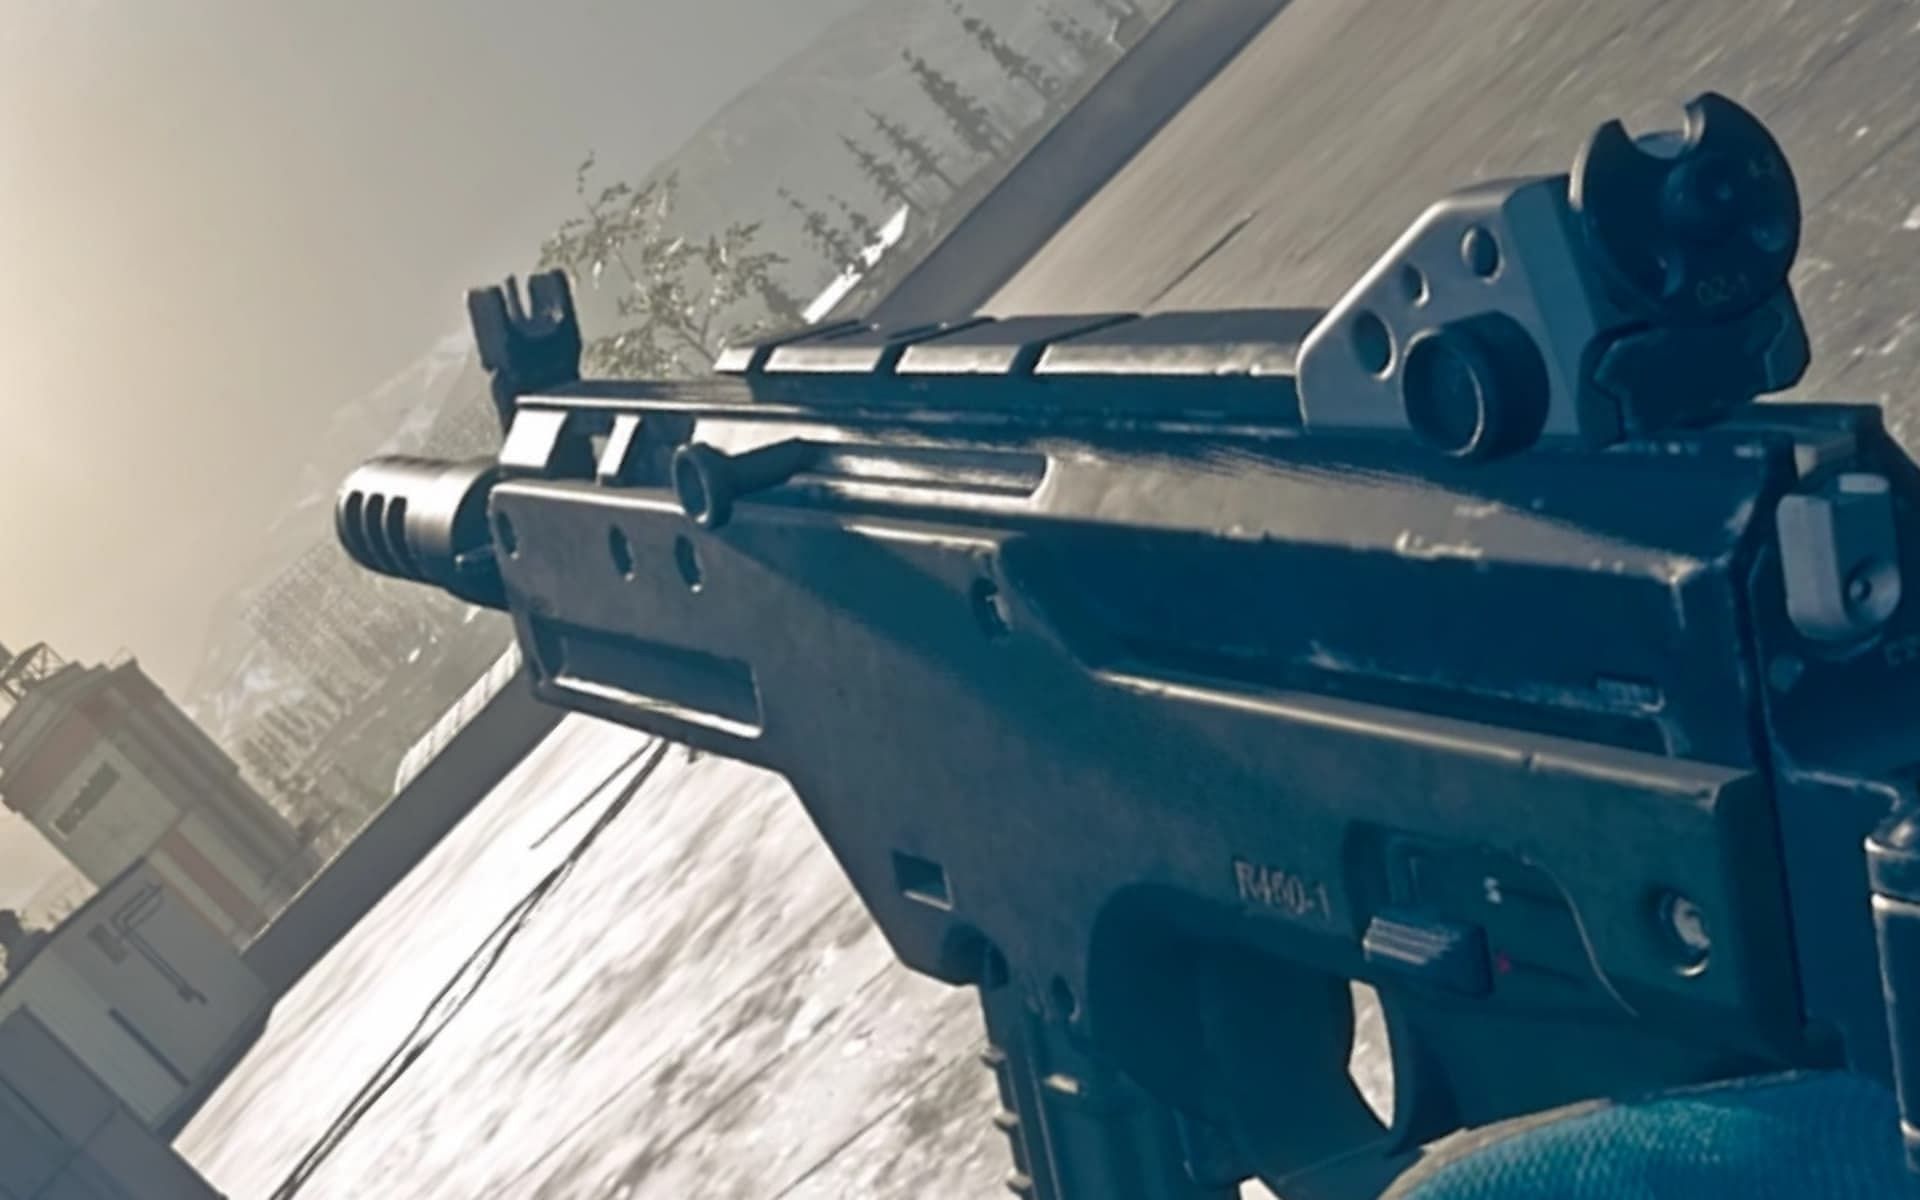 COD: Warzone Season 3 contains some incredibly powerful weapons (Image via Activision)